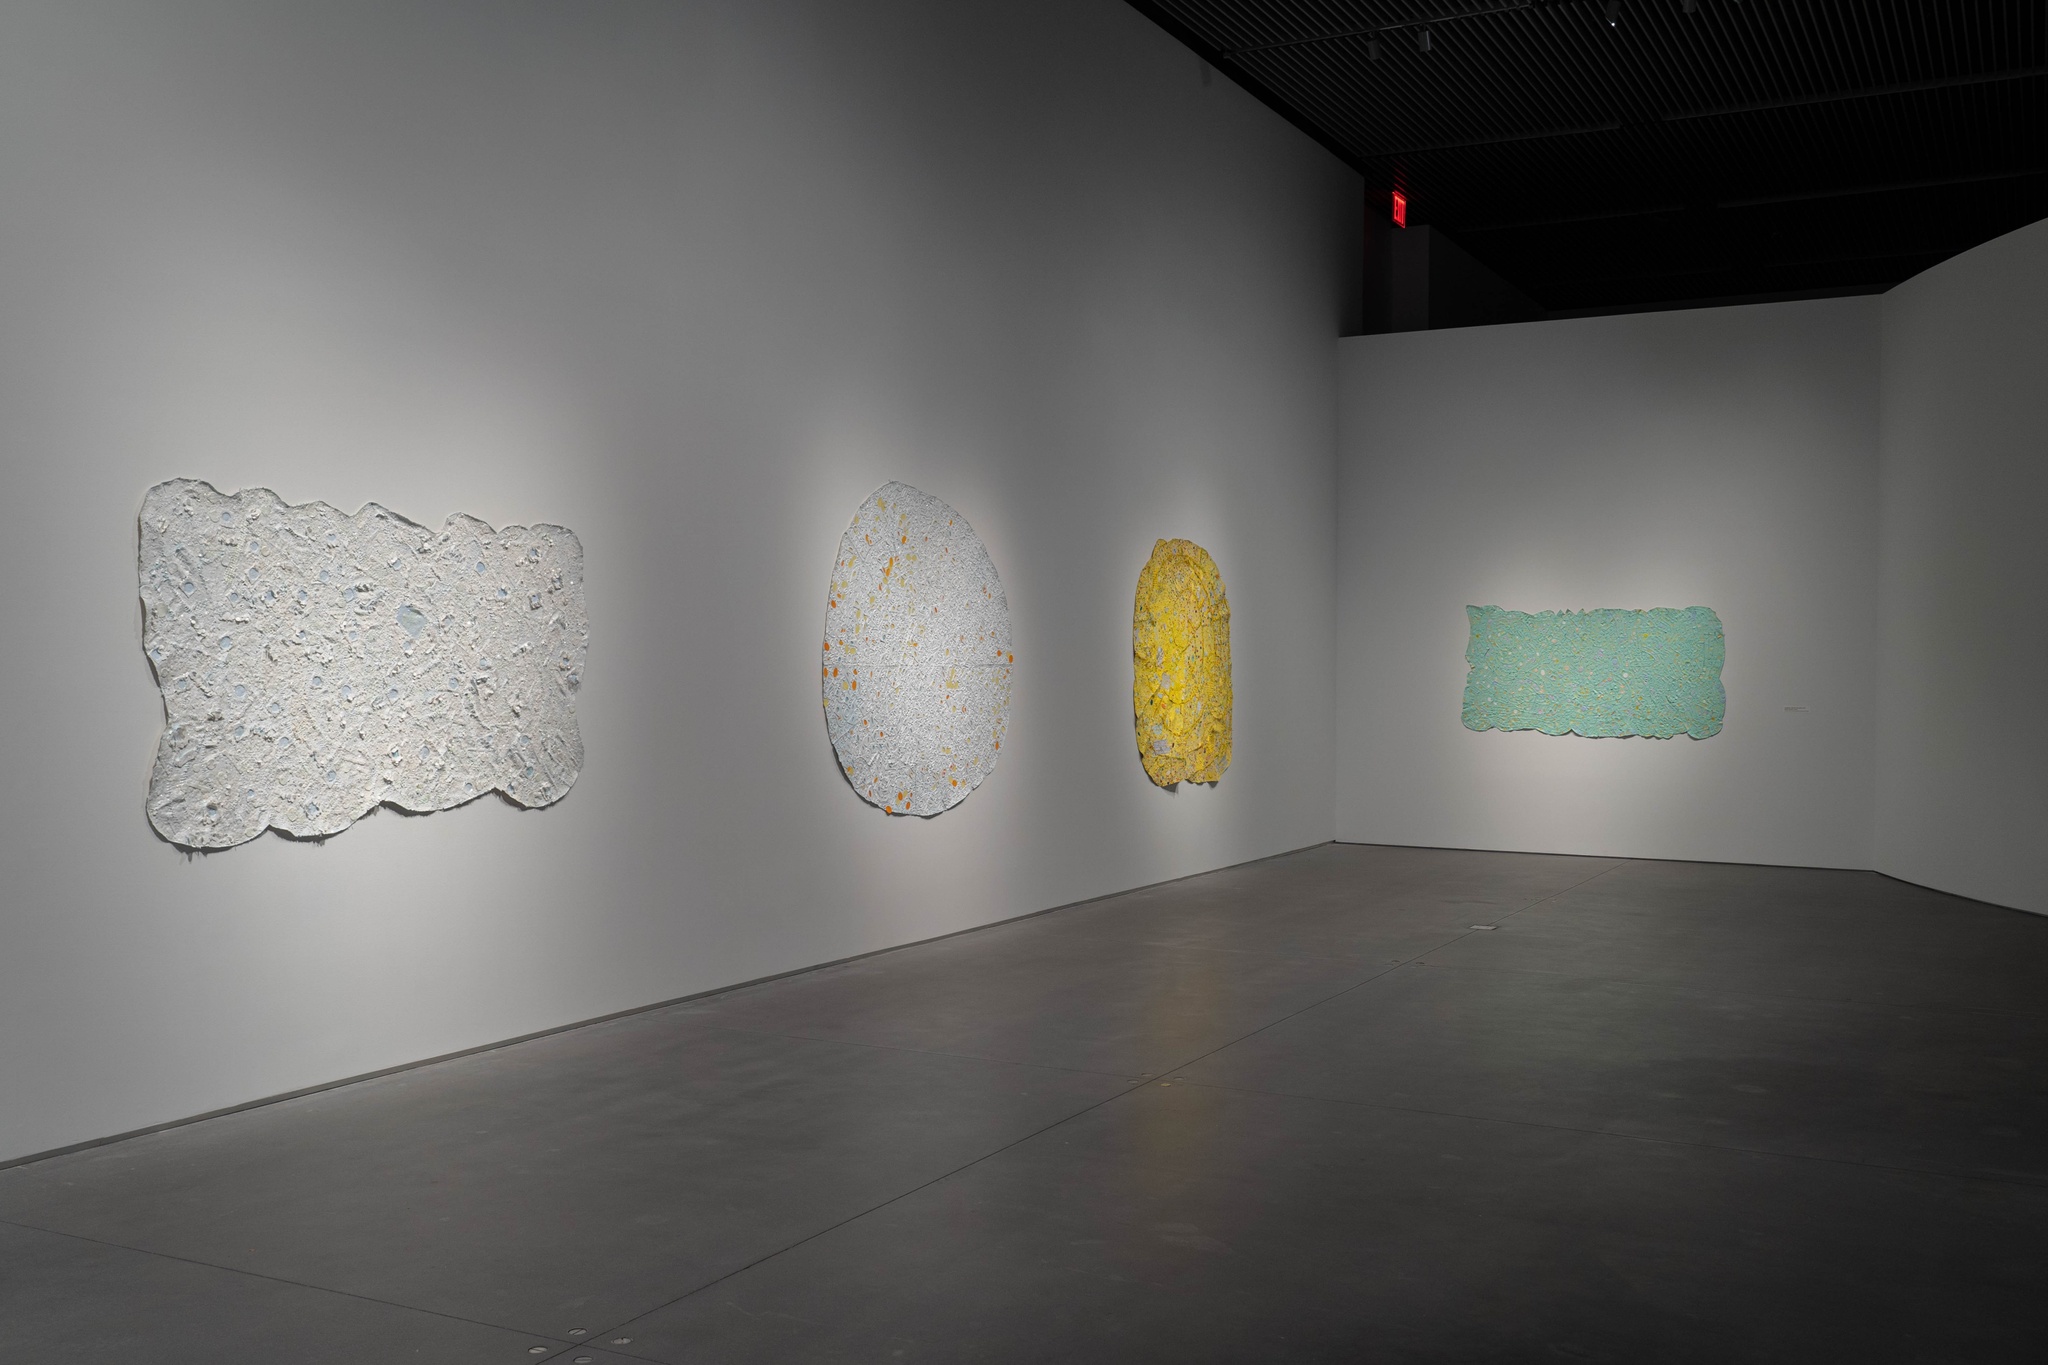 An installation view of abstract paintings in the exhibition Howardena Pindell: Rope/Fire/Water. The curvilinear and rectangular canvases progress from two works predominantly in white, to a yellow canvas, to a green rectangular painting with irregular edges facing the camera on the far wall.